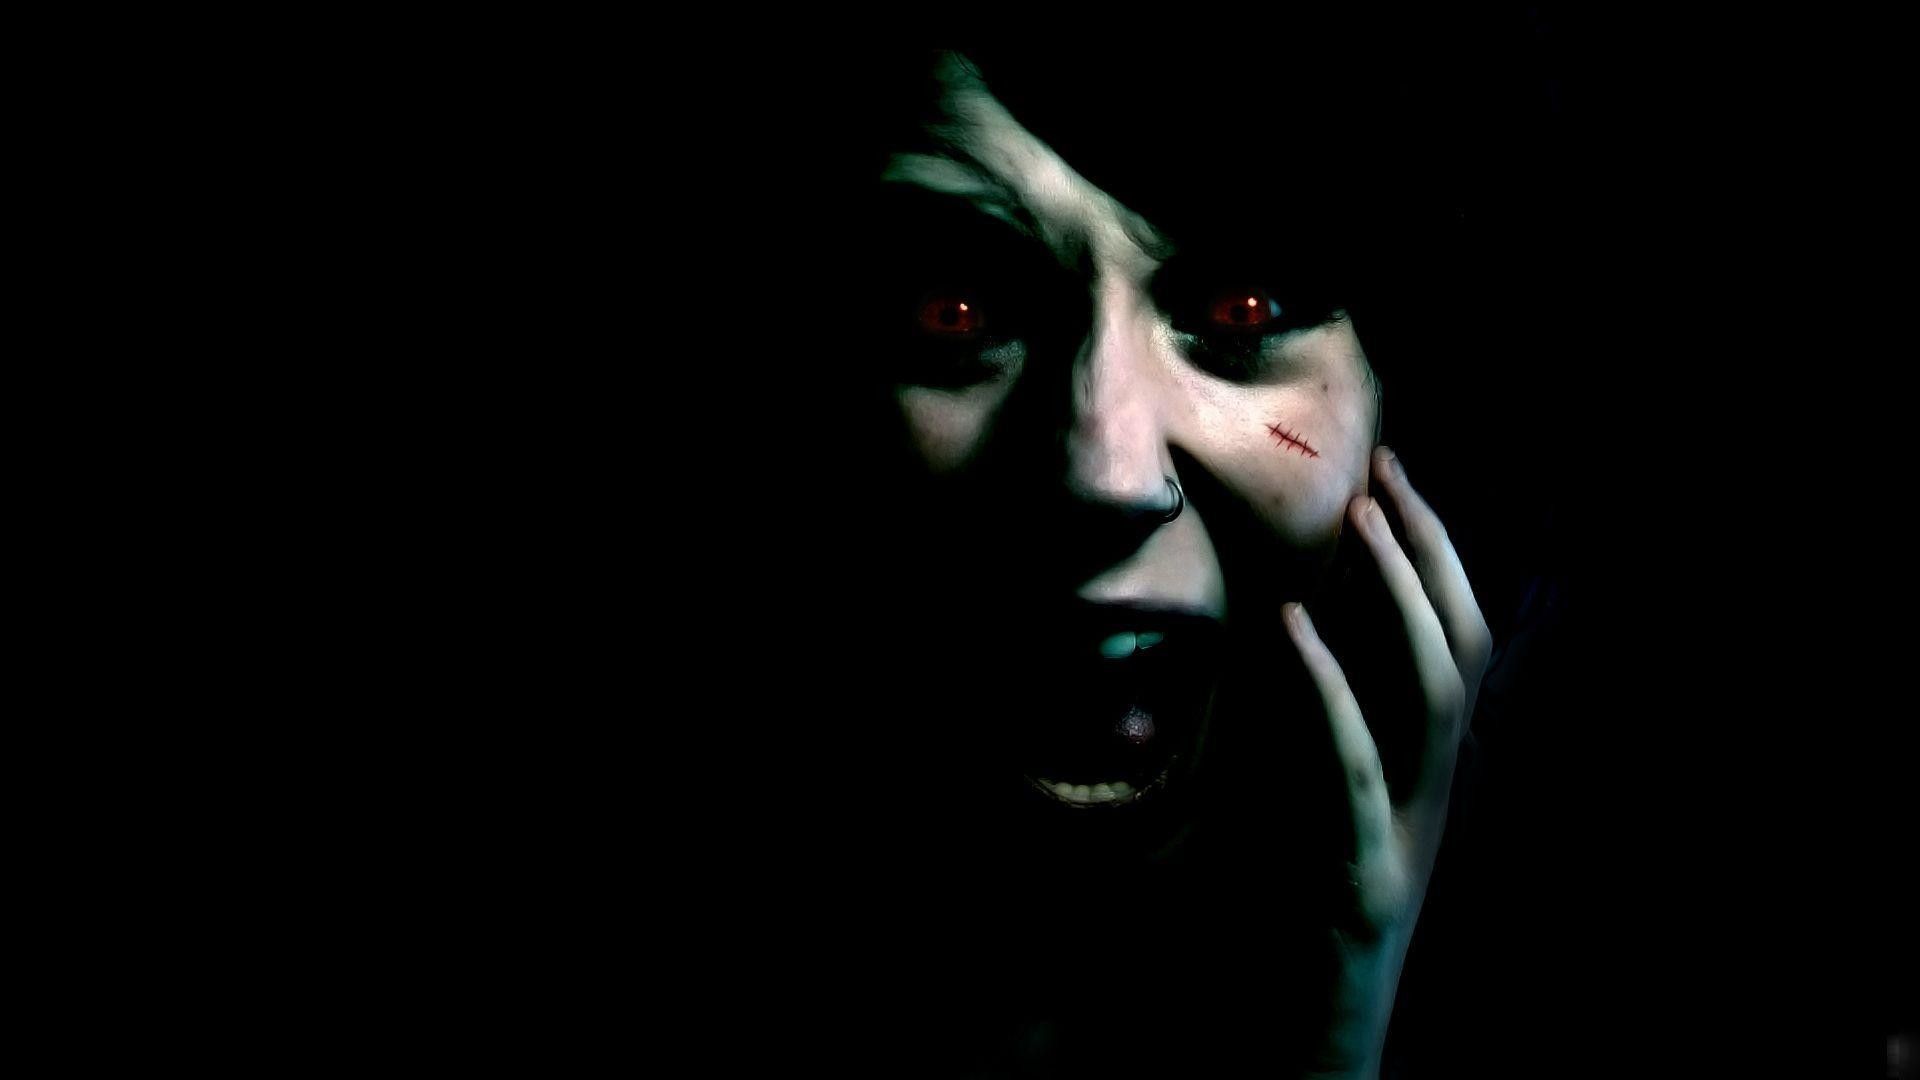 A woman with red eyes in the dark - Horror, creepy